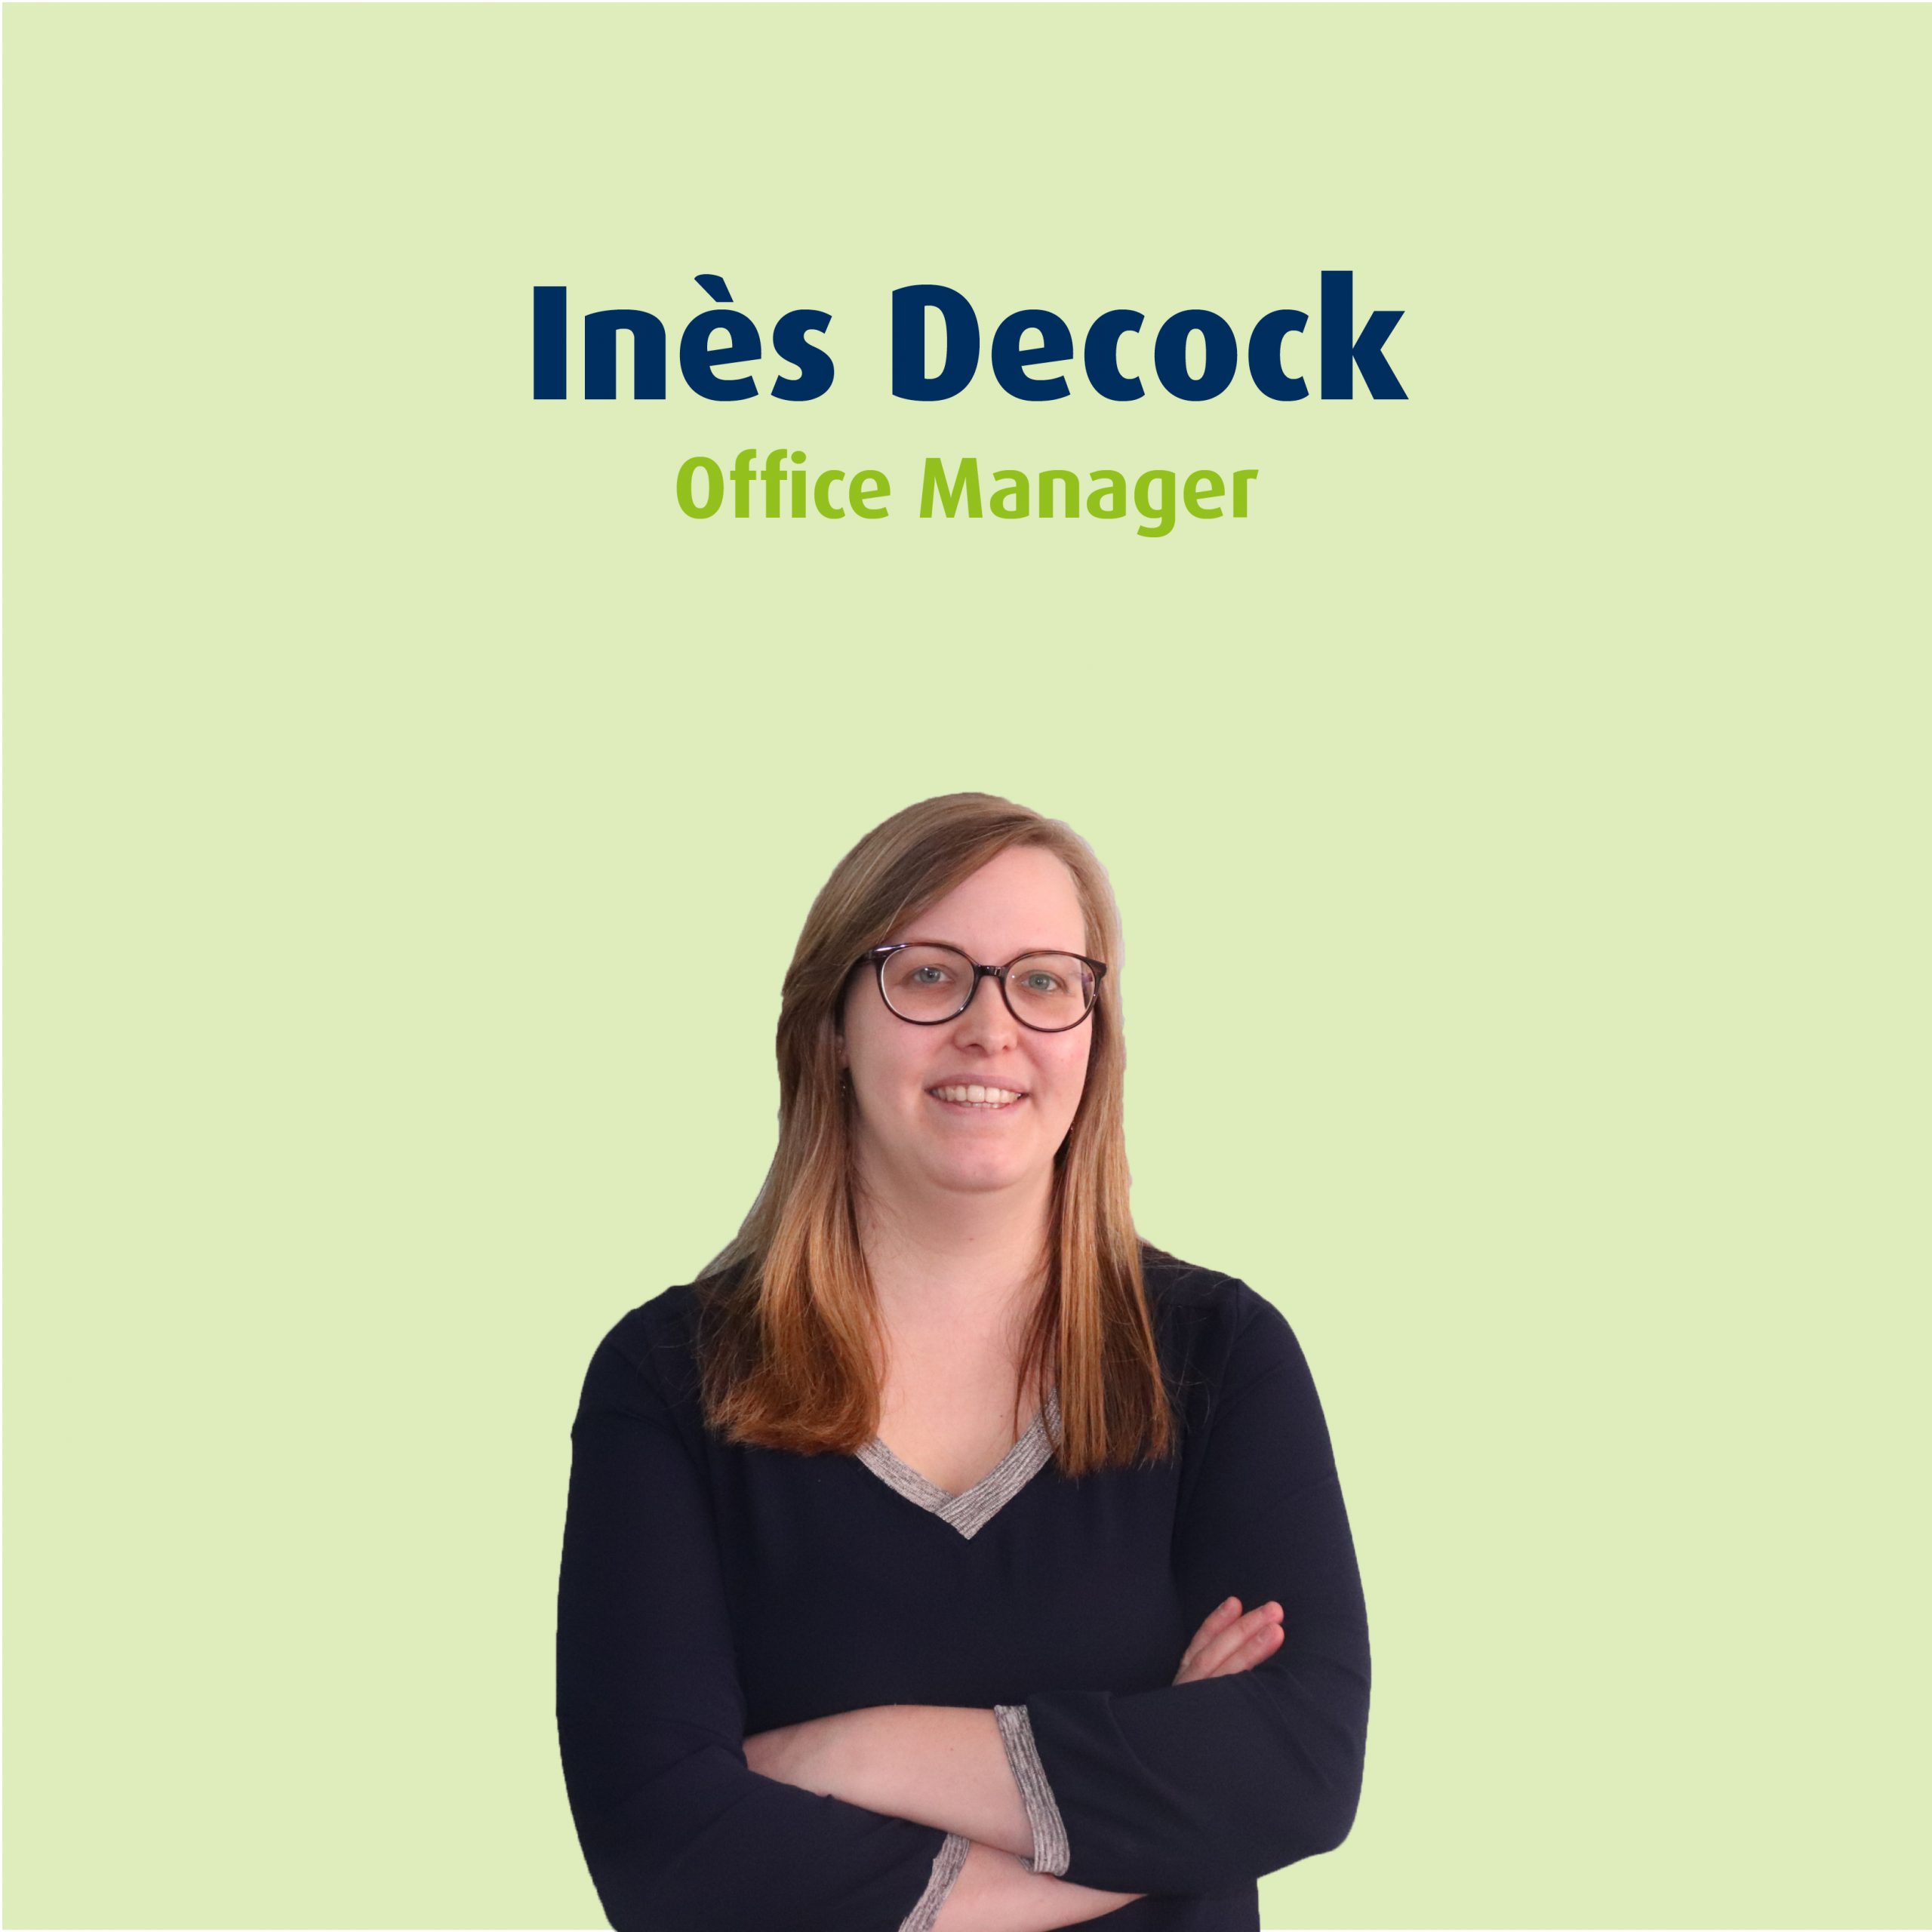 Inès Decock Office Manager